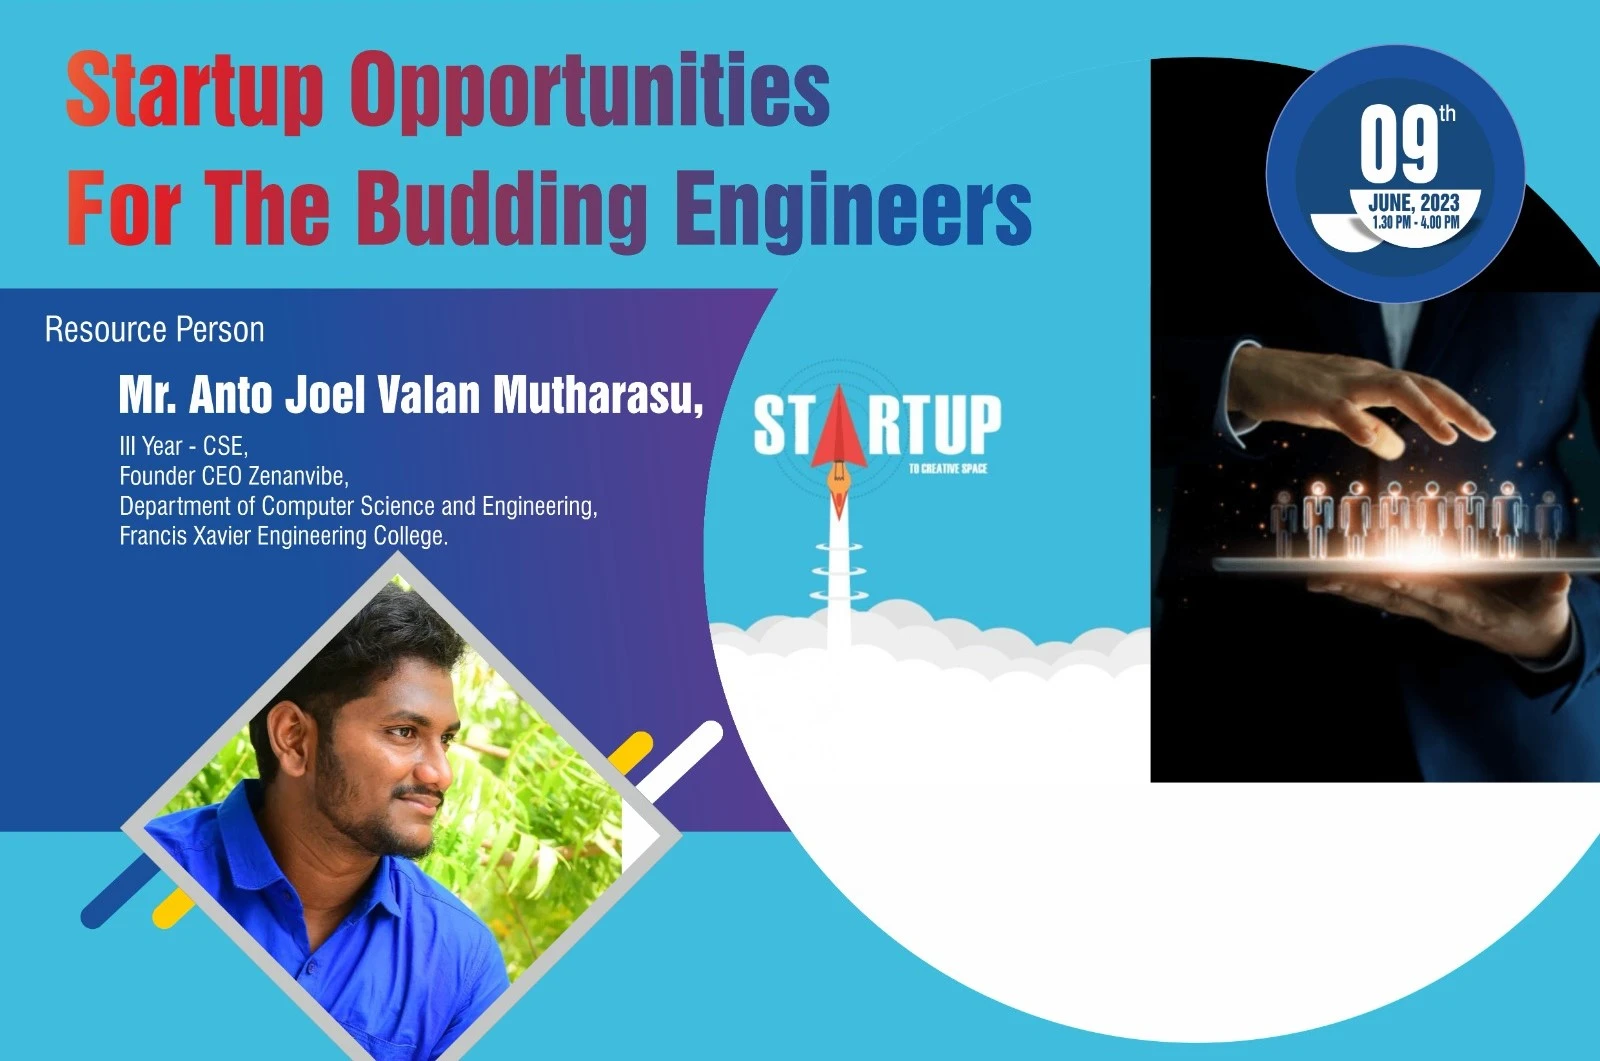 Startup Opportunities for The Budding Engineers